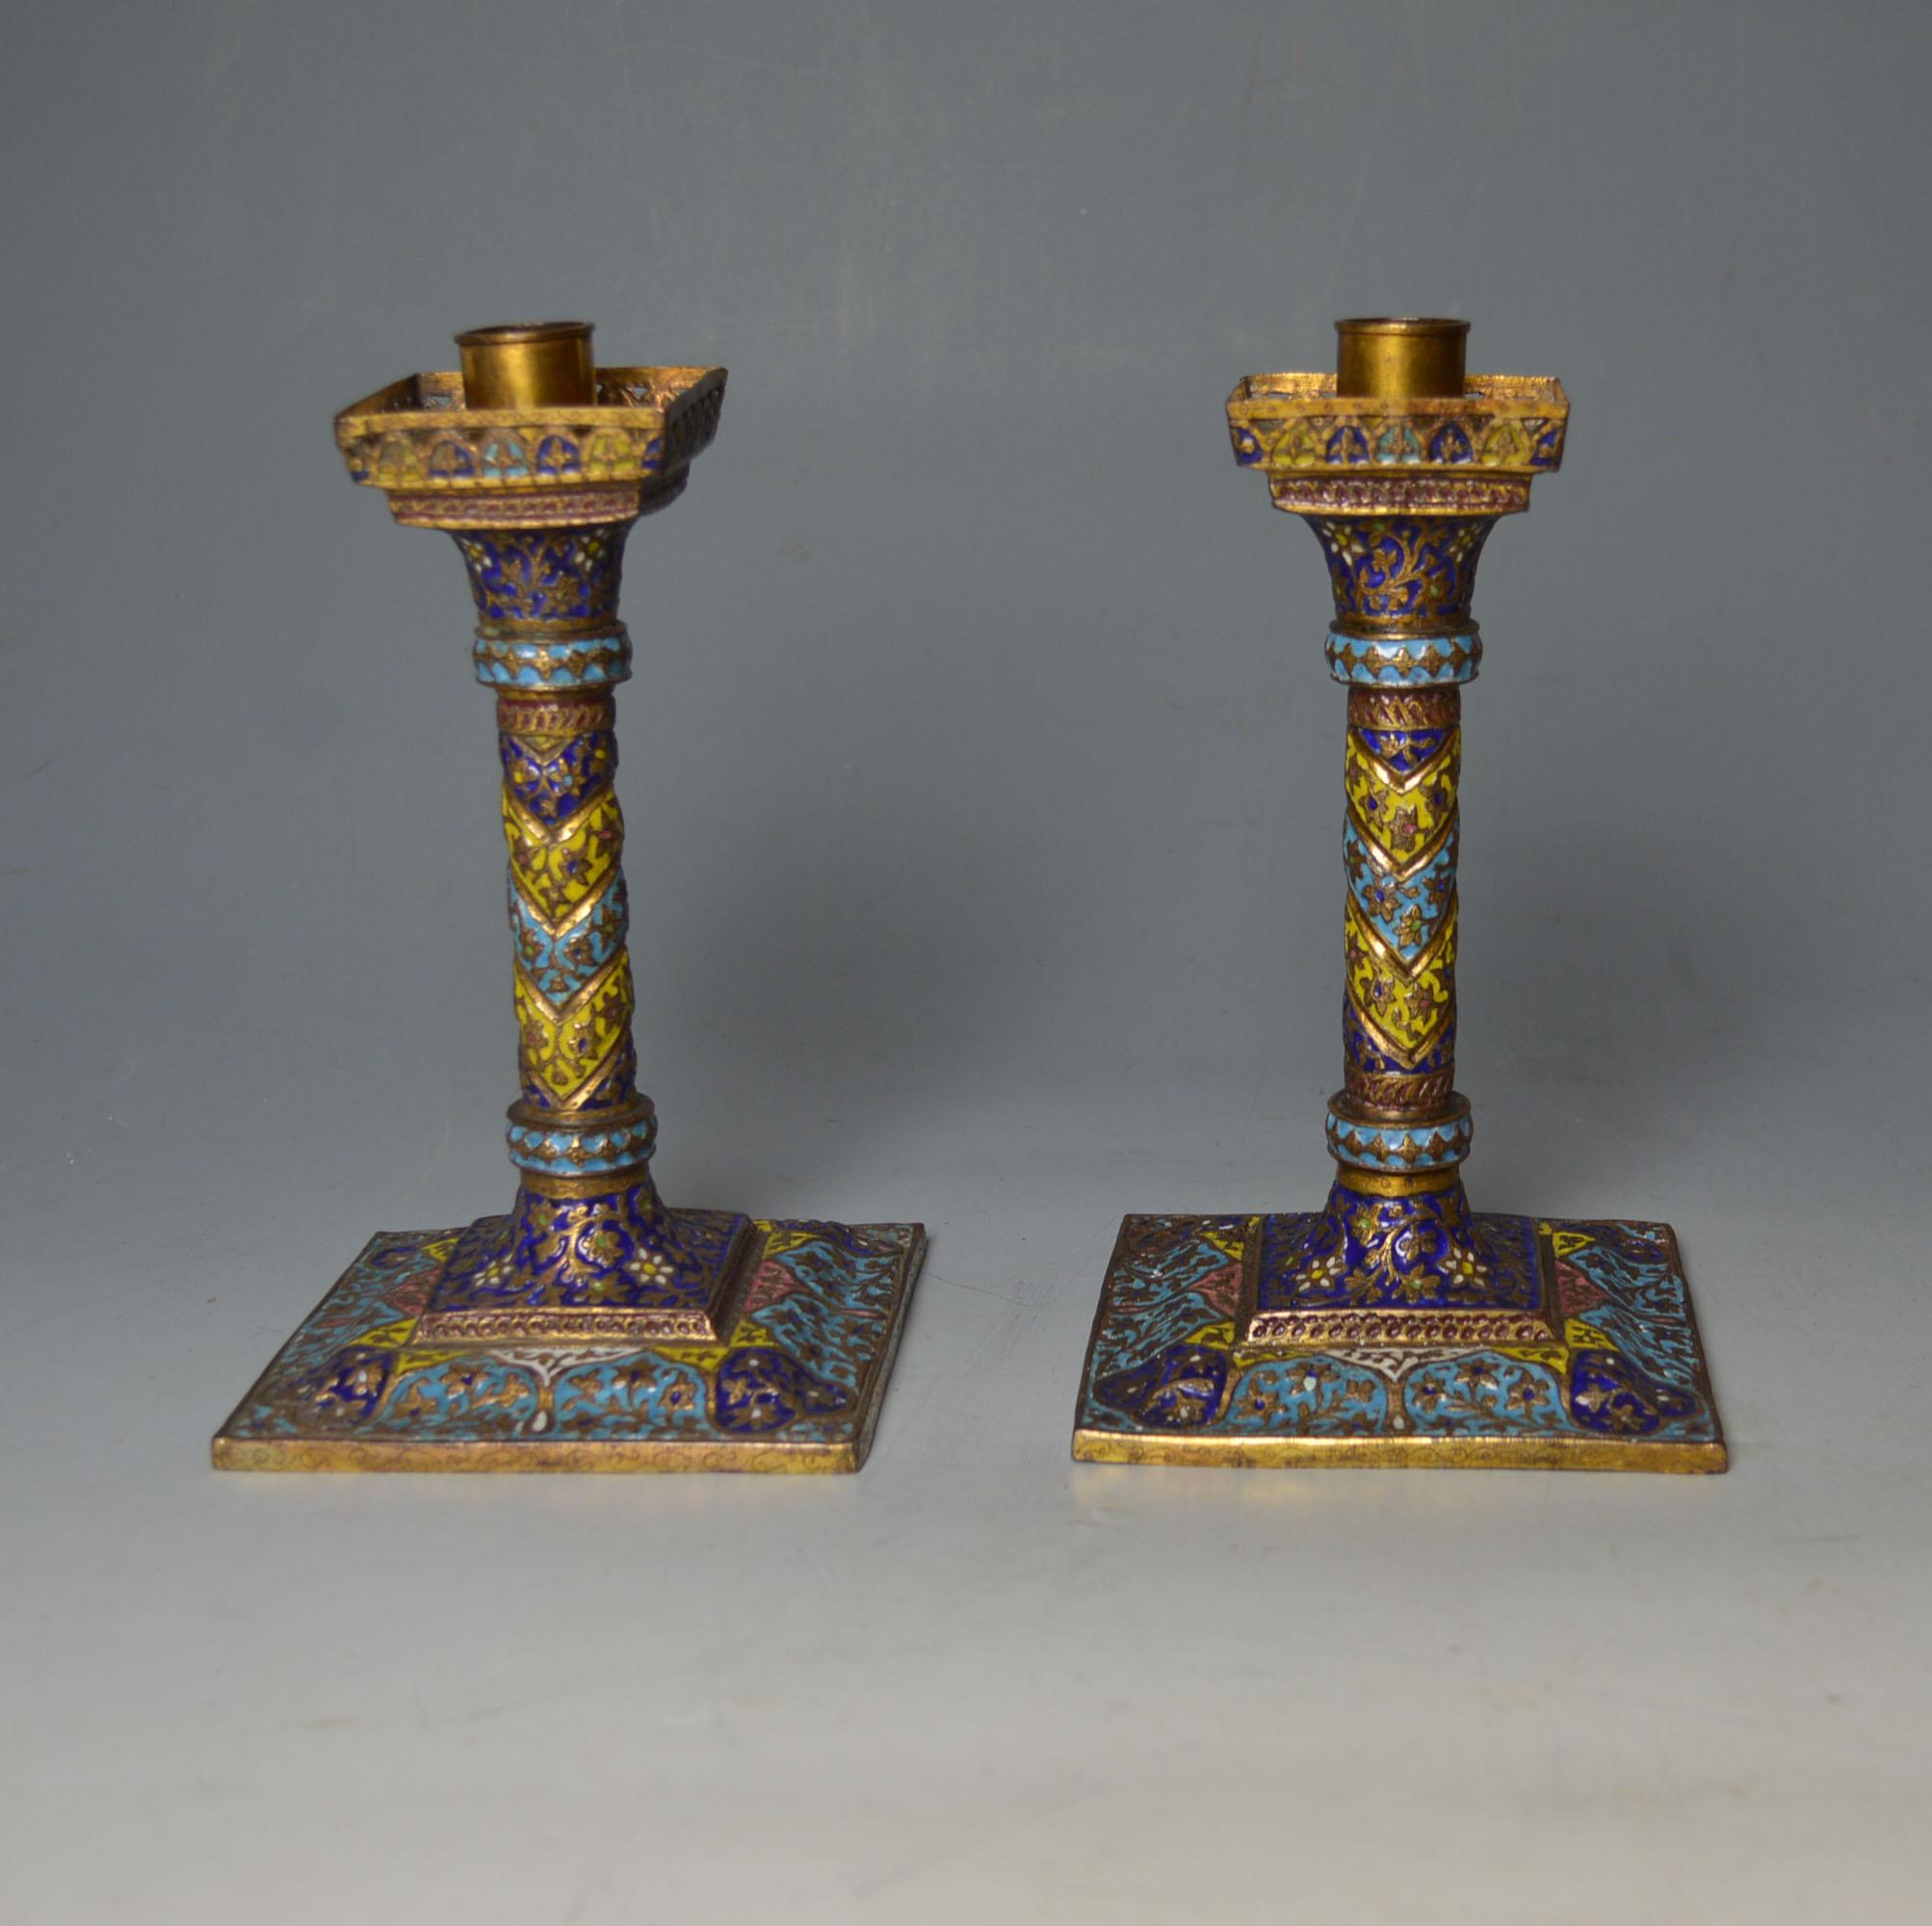 Fine Antique Kashmiri Enamelled gilt copper candle stick holders.
Superb square based candle holders hand crafted from copper and embellished with colourful polychrome floral work enamel design and gold gilt 
Dating from the 19th century, made for